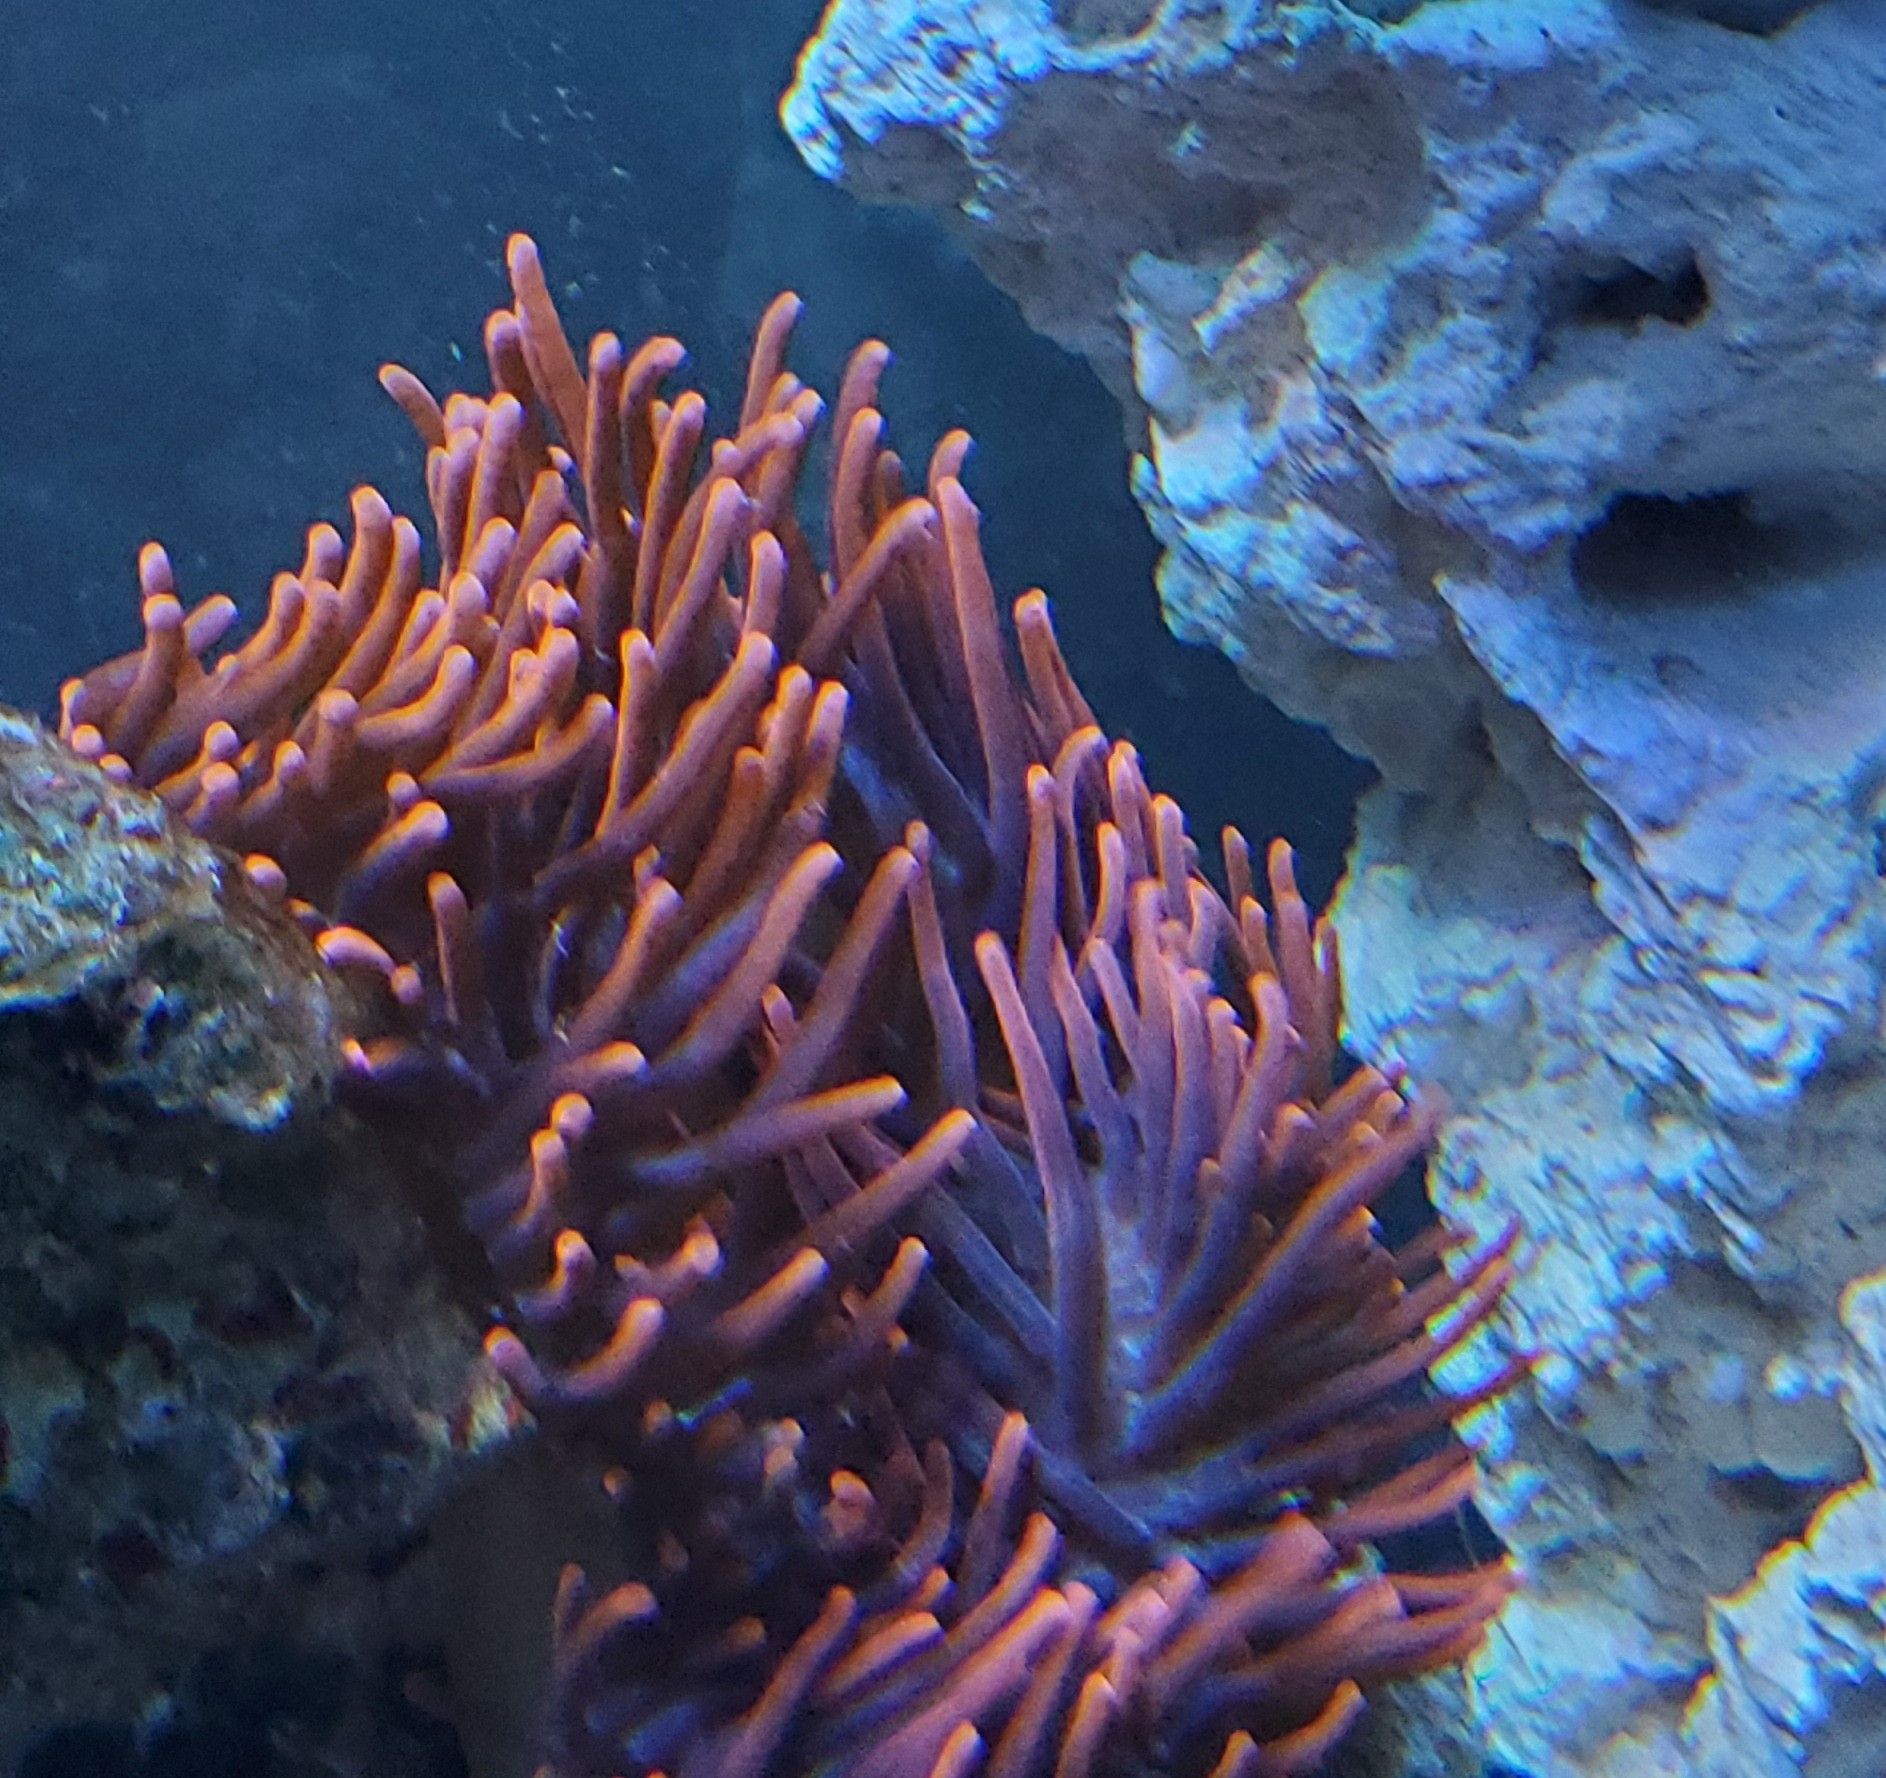 Rose bubble tip anemone. Very bright pink color. Pictures show a true color of it.